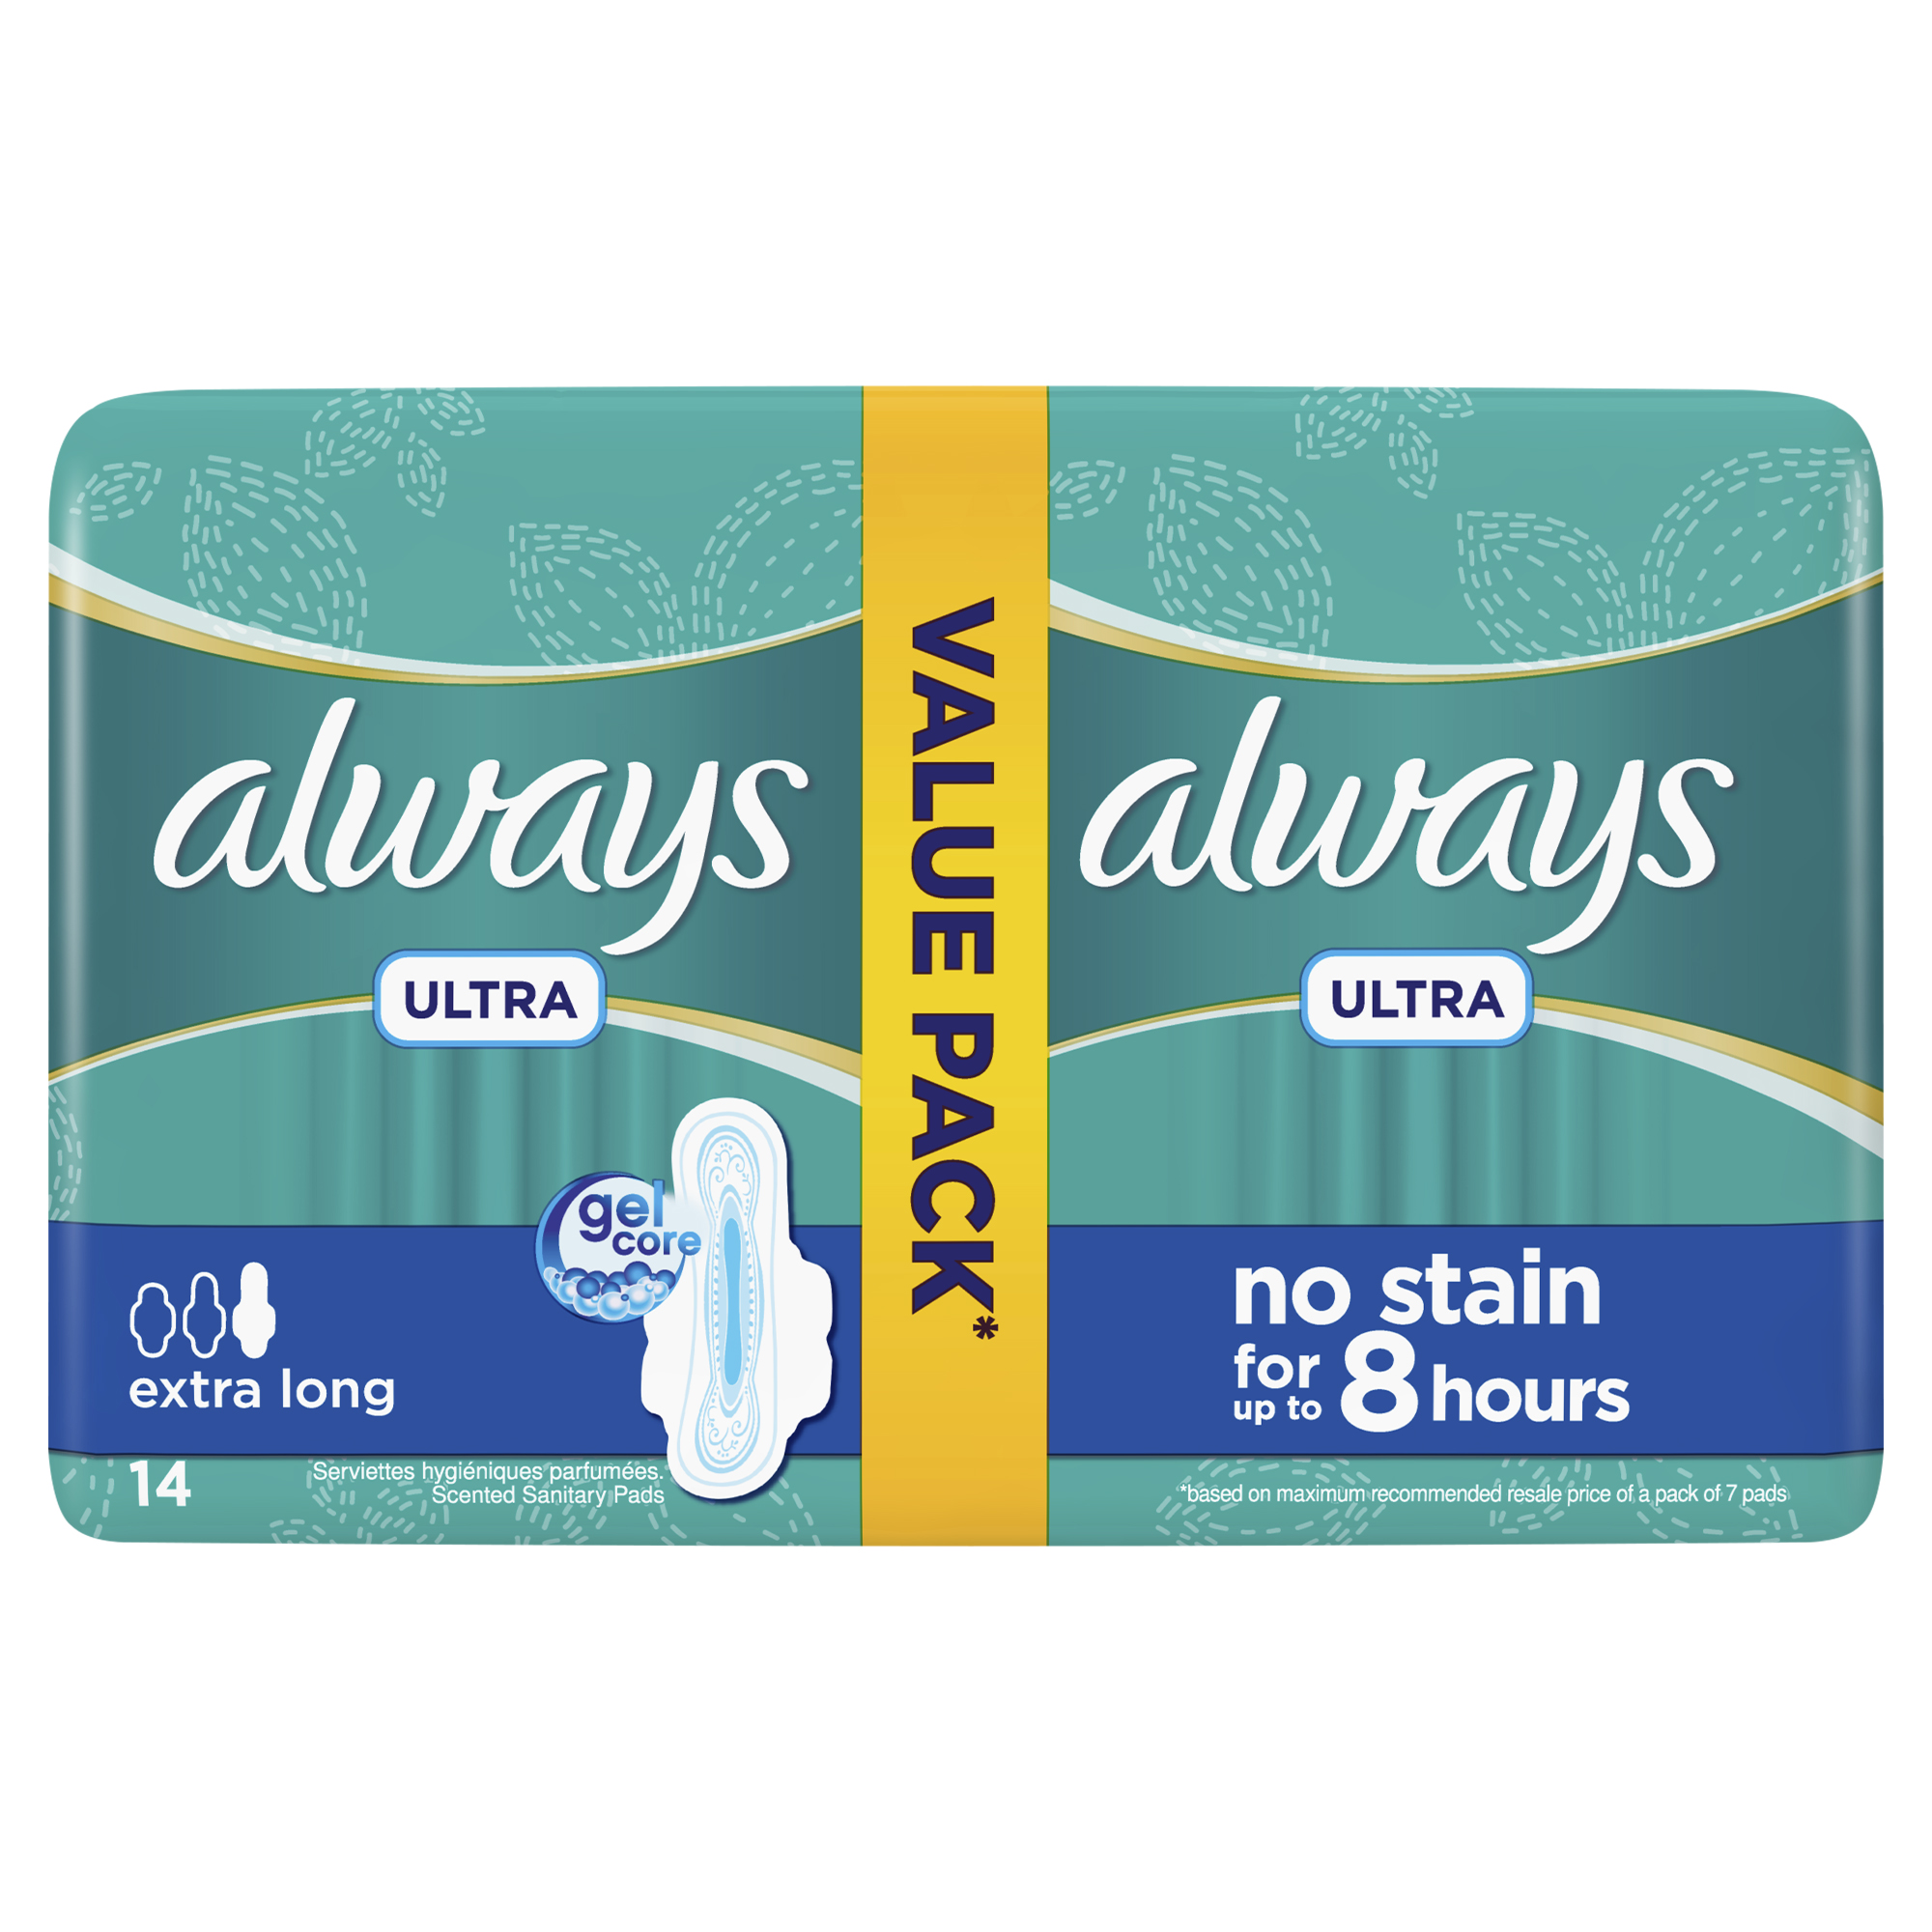 Buy Always Ultra Thin 3 in 1 Extra Long 7 Pads Available Online at